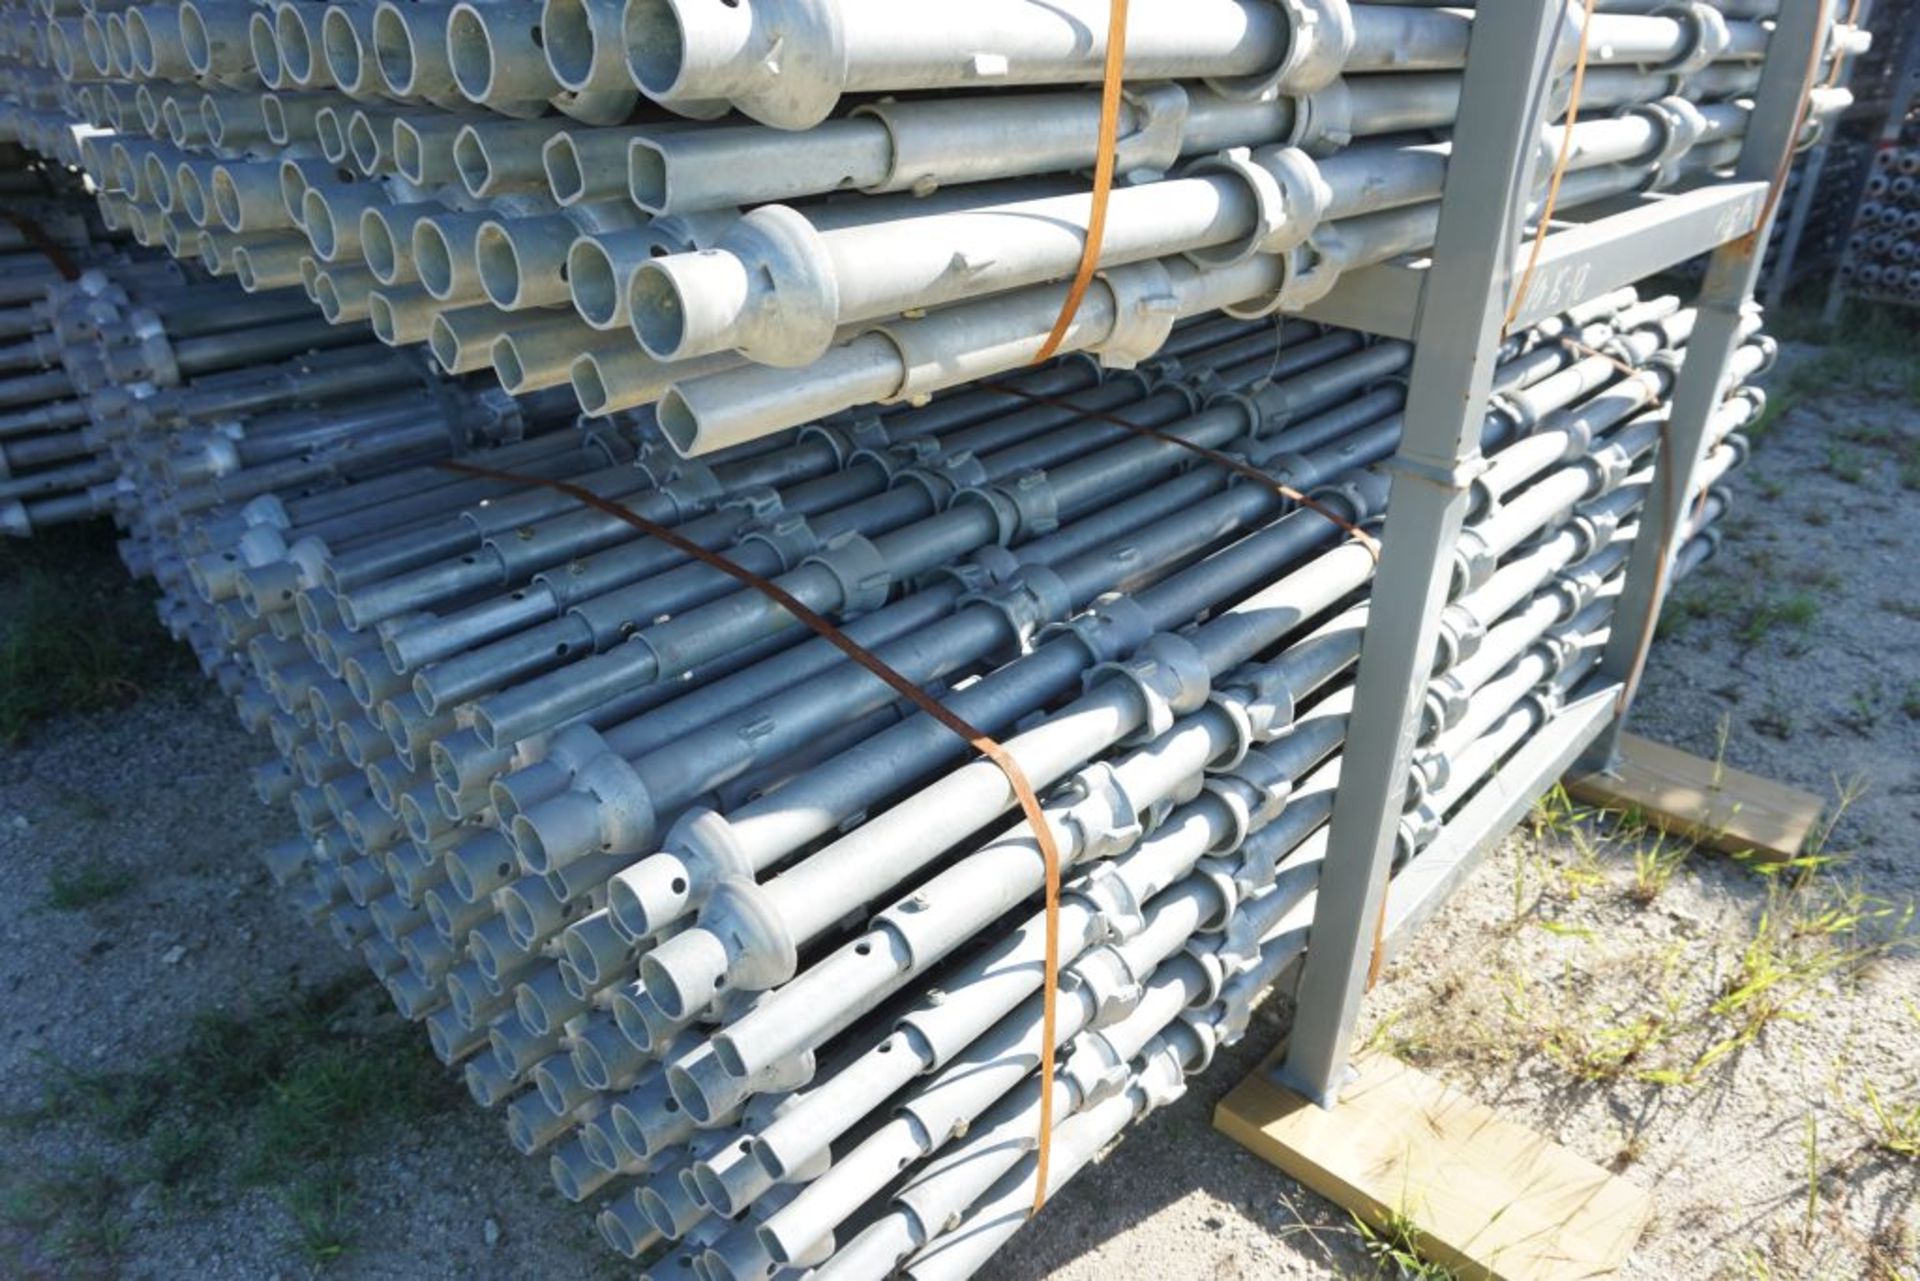 Lot of (250) 8' 2" (2.5M) Vertical 5 Cup; Type: CLV82 - (2) Racks Per Lot - Approximate Weight:7,850 - Image 5 of 10